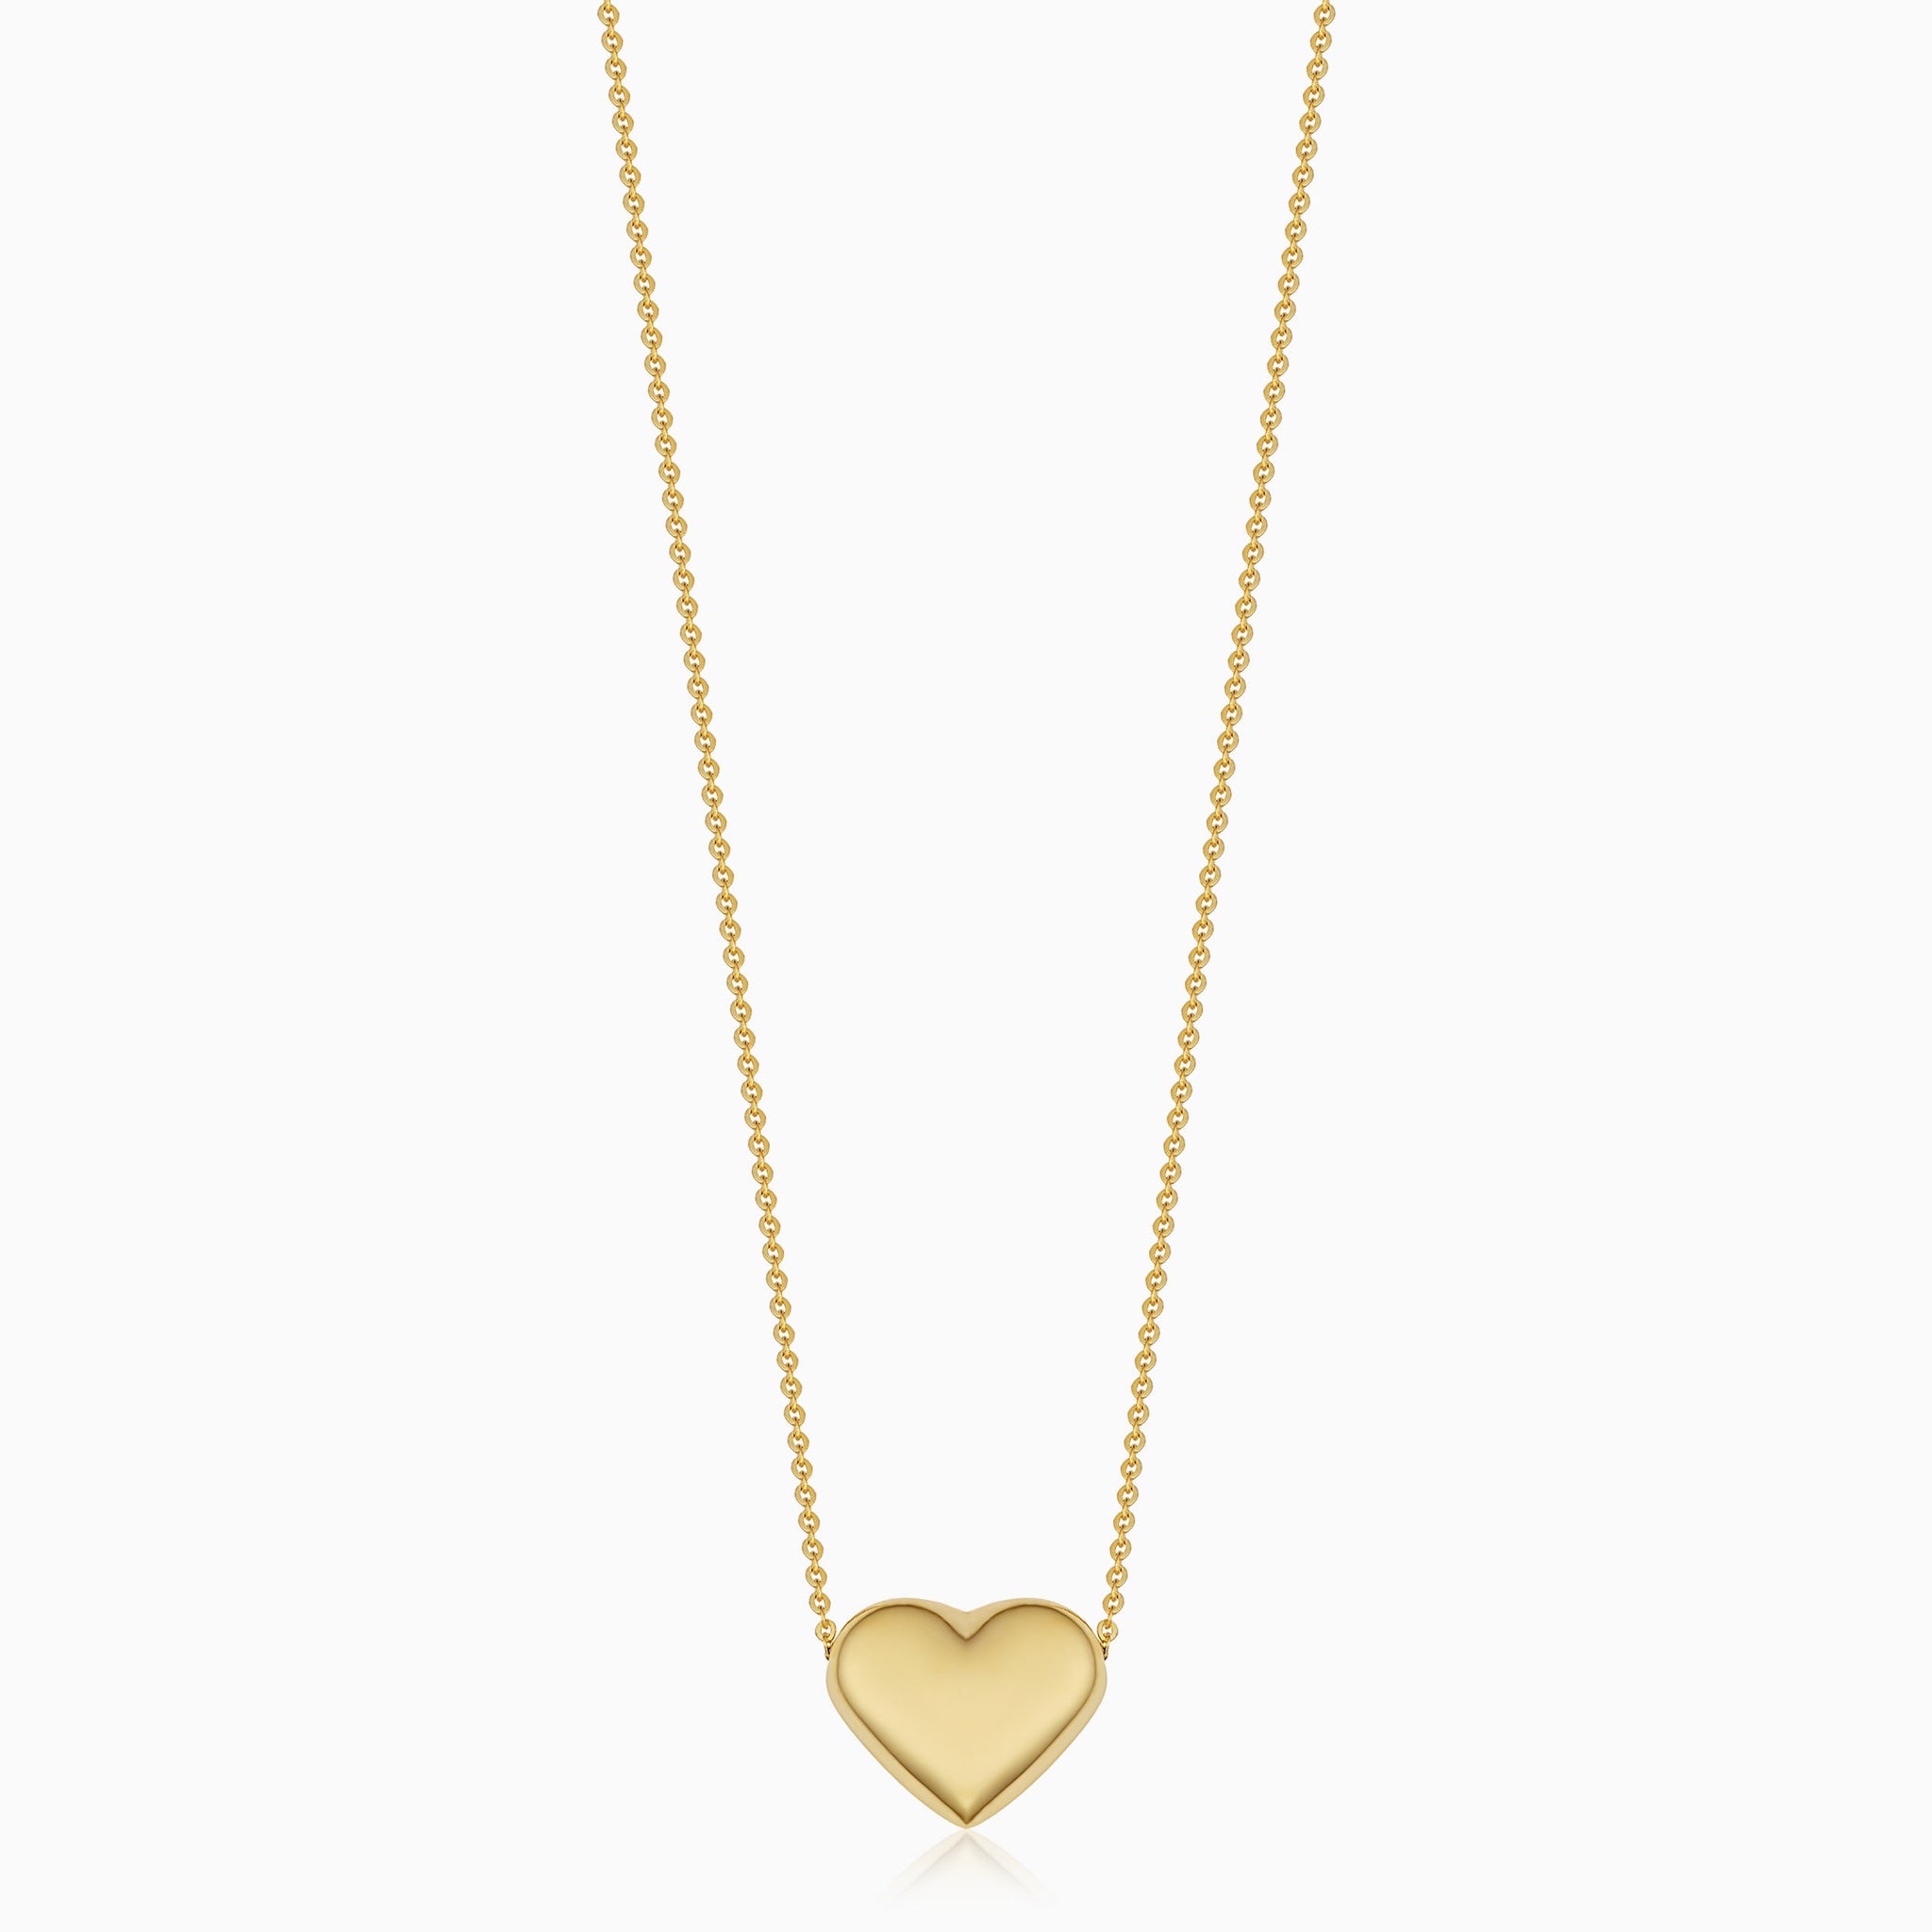 Cailin Gold Pendant Necklace in Green Crystal | Kendra Scott